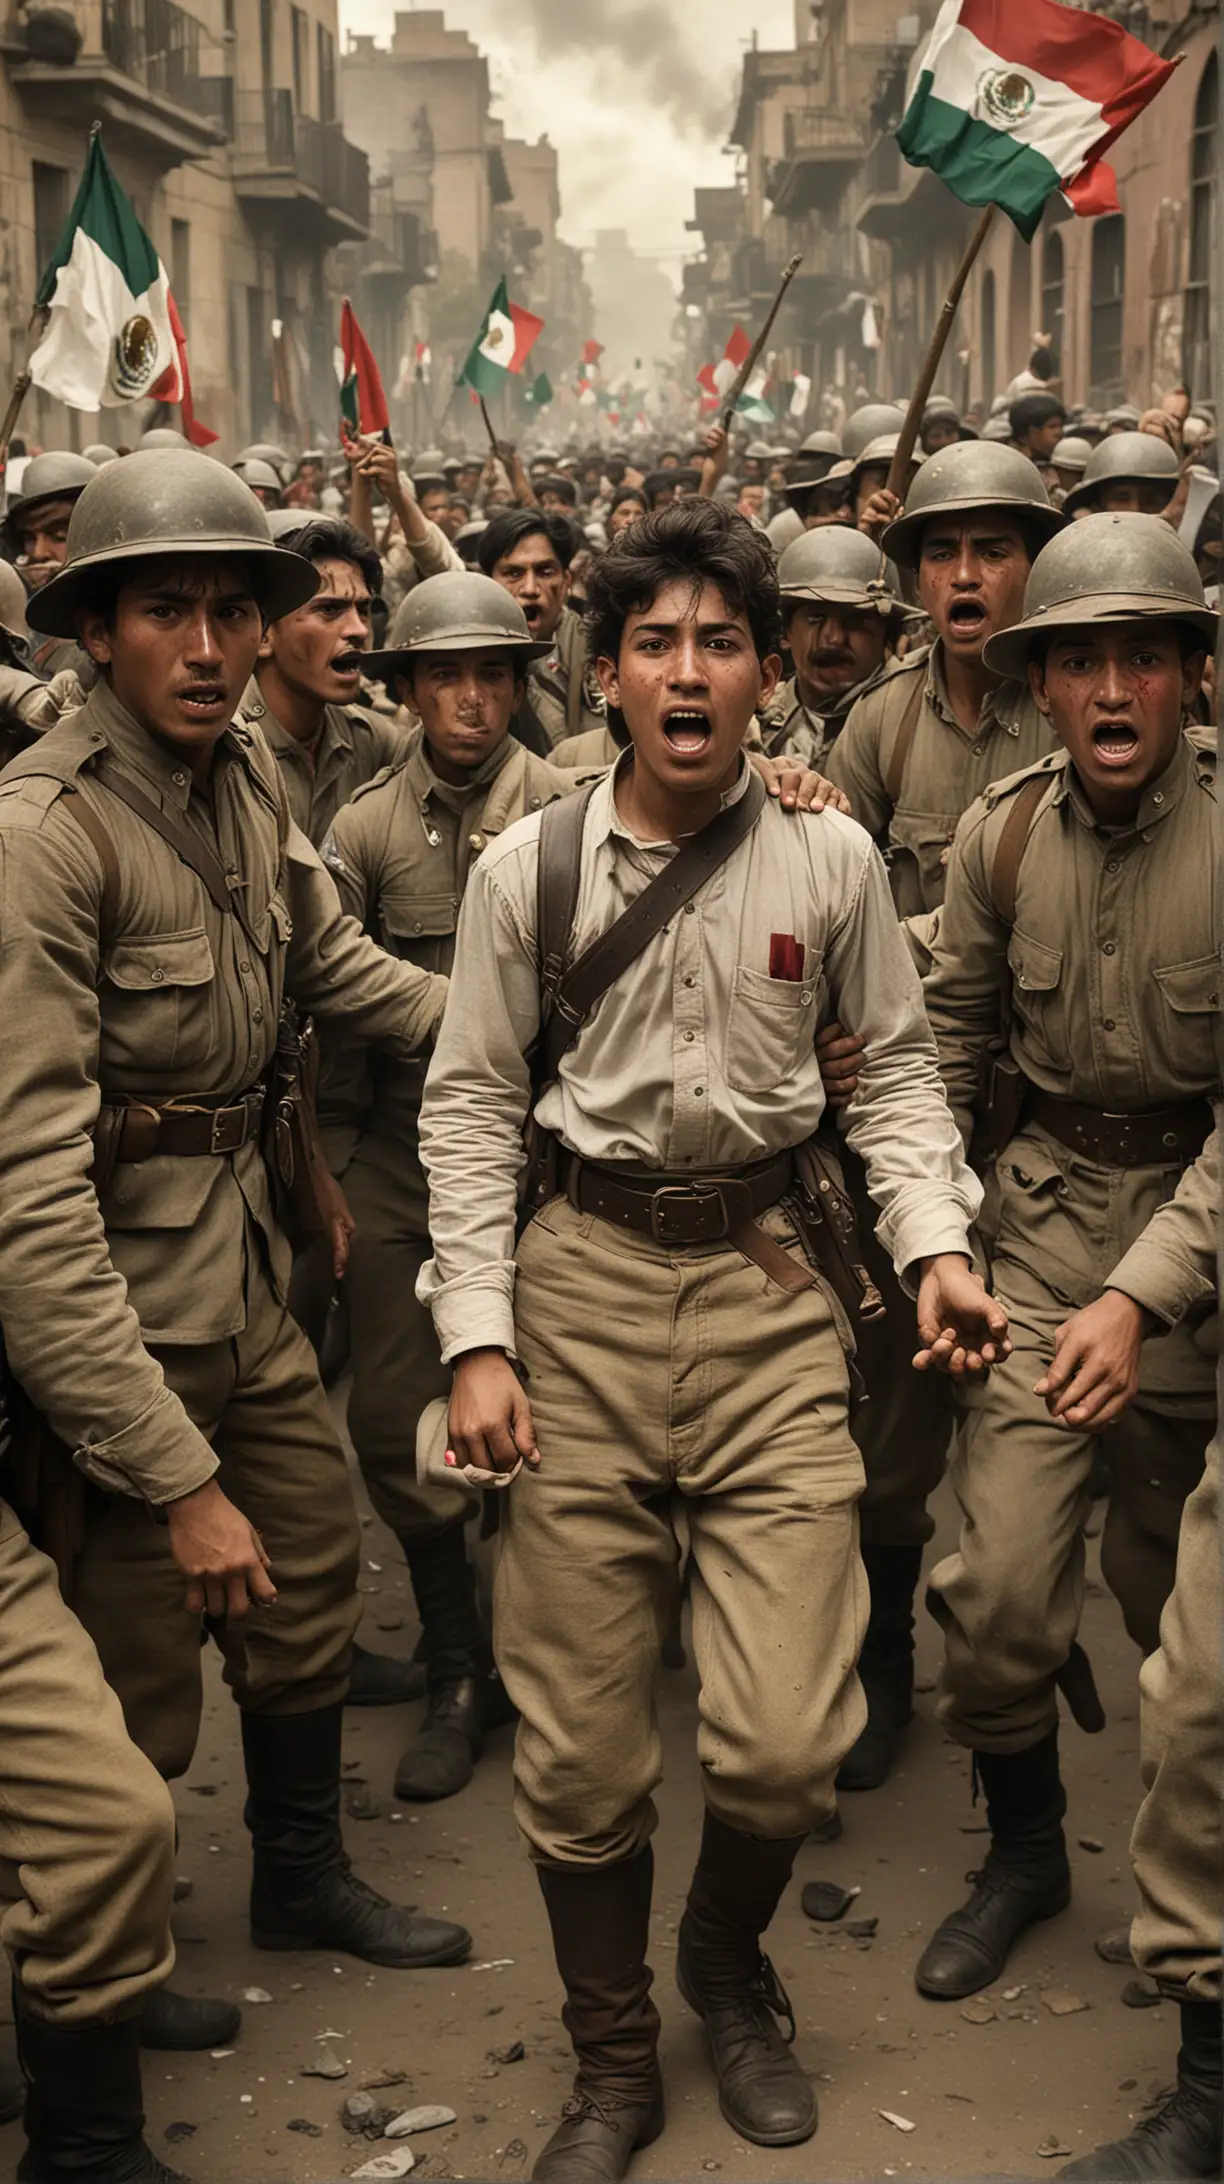 Create an image of 20-year-old Mexican student Veneslao Moguel being arrested by soldiers during the Mexican Revolution in 1915. Veneslao should appear determined yet anxious, with soldiers gripping his arms tightly. The background can show a turbulent scene reflecting the chaos of the revolution, with flags and revolutionary slogans visible.